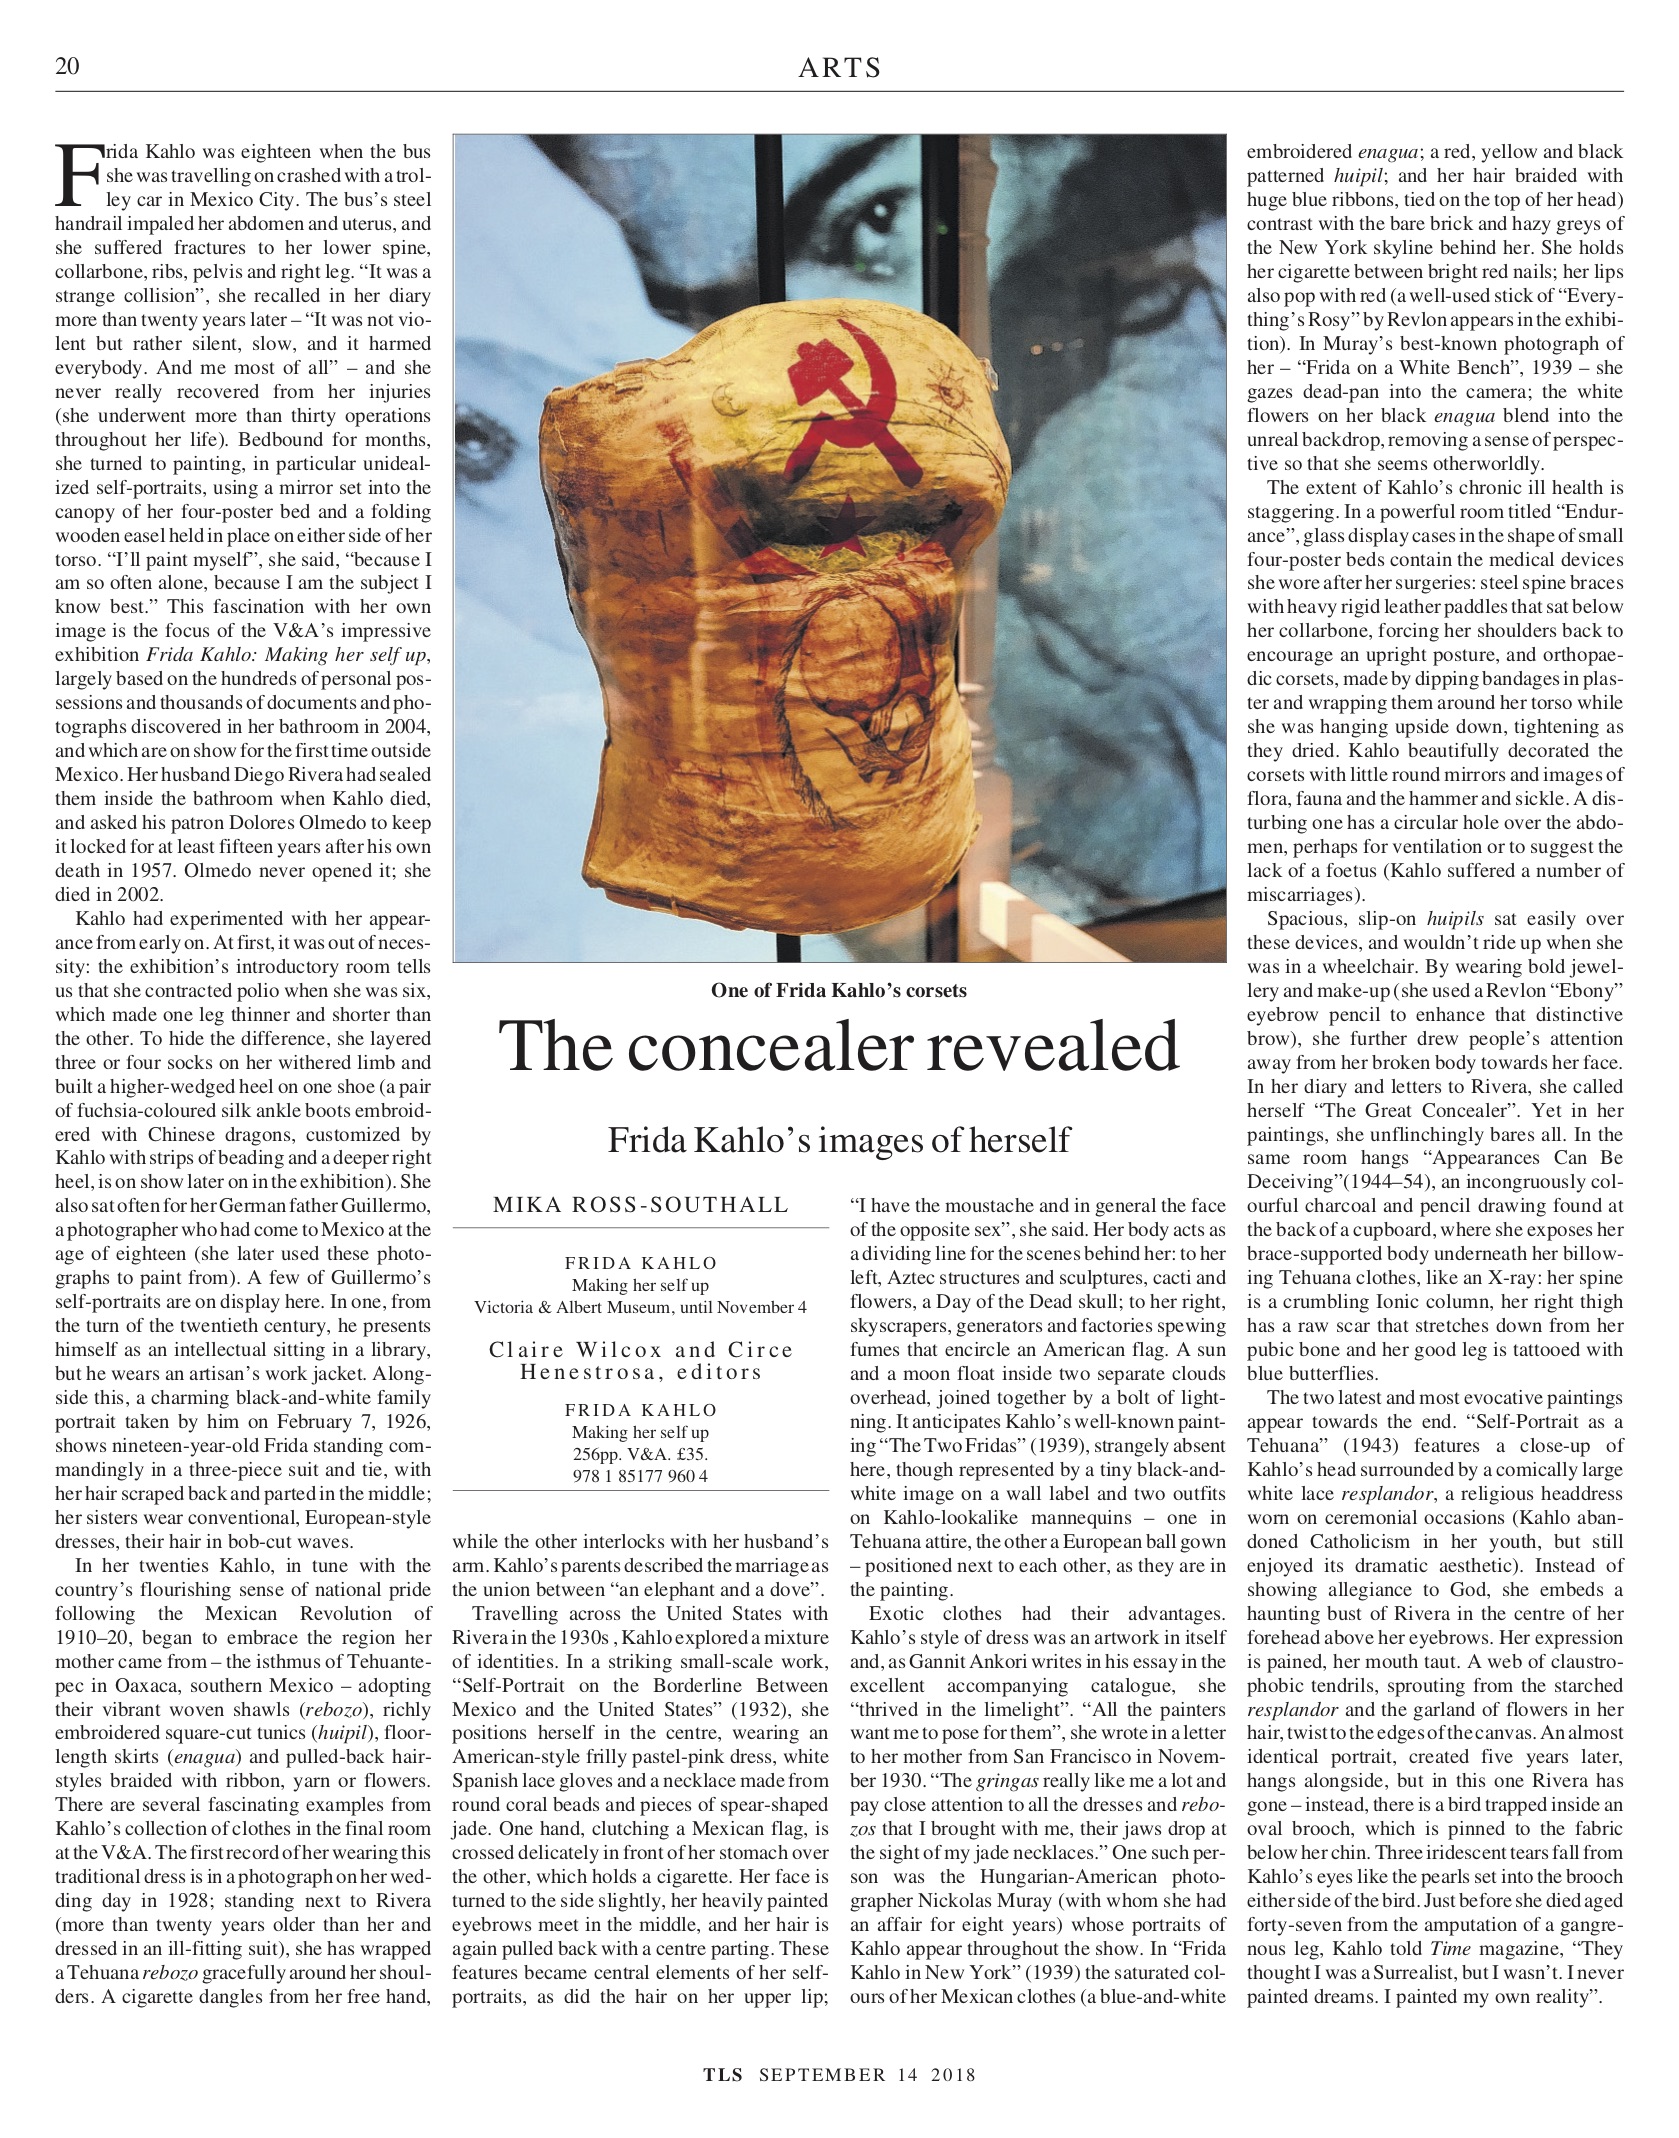  The Times Literary Supplement, 14 September 2018. "The concealer revealed"